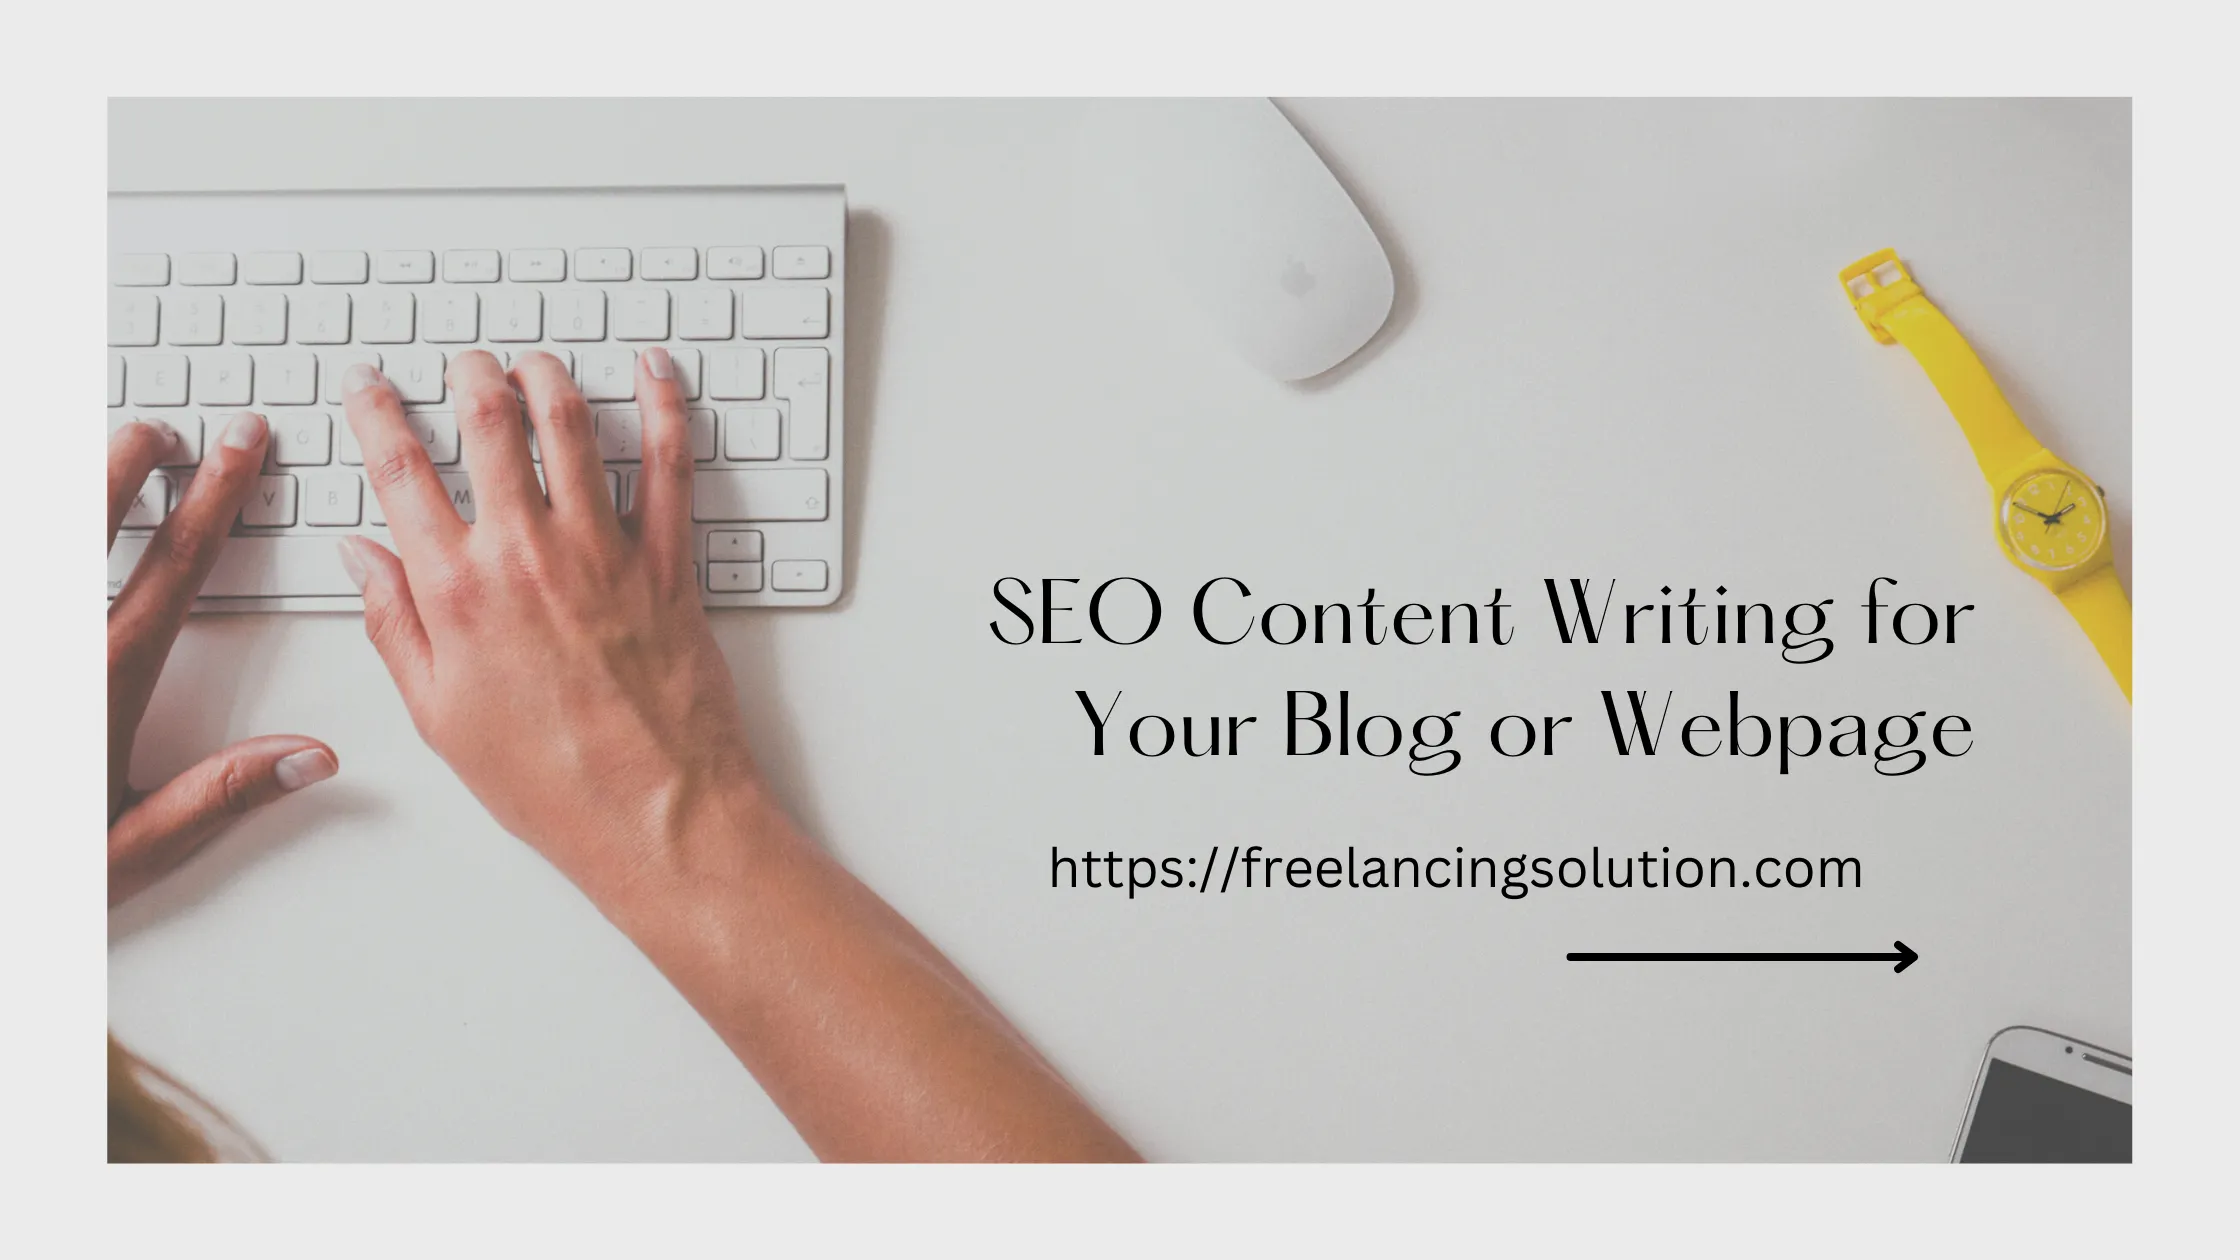 SEO Content Writing for Your Blog or Webpage